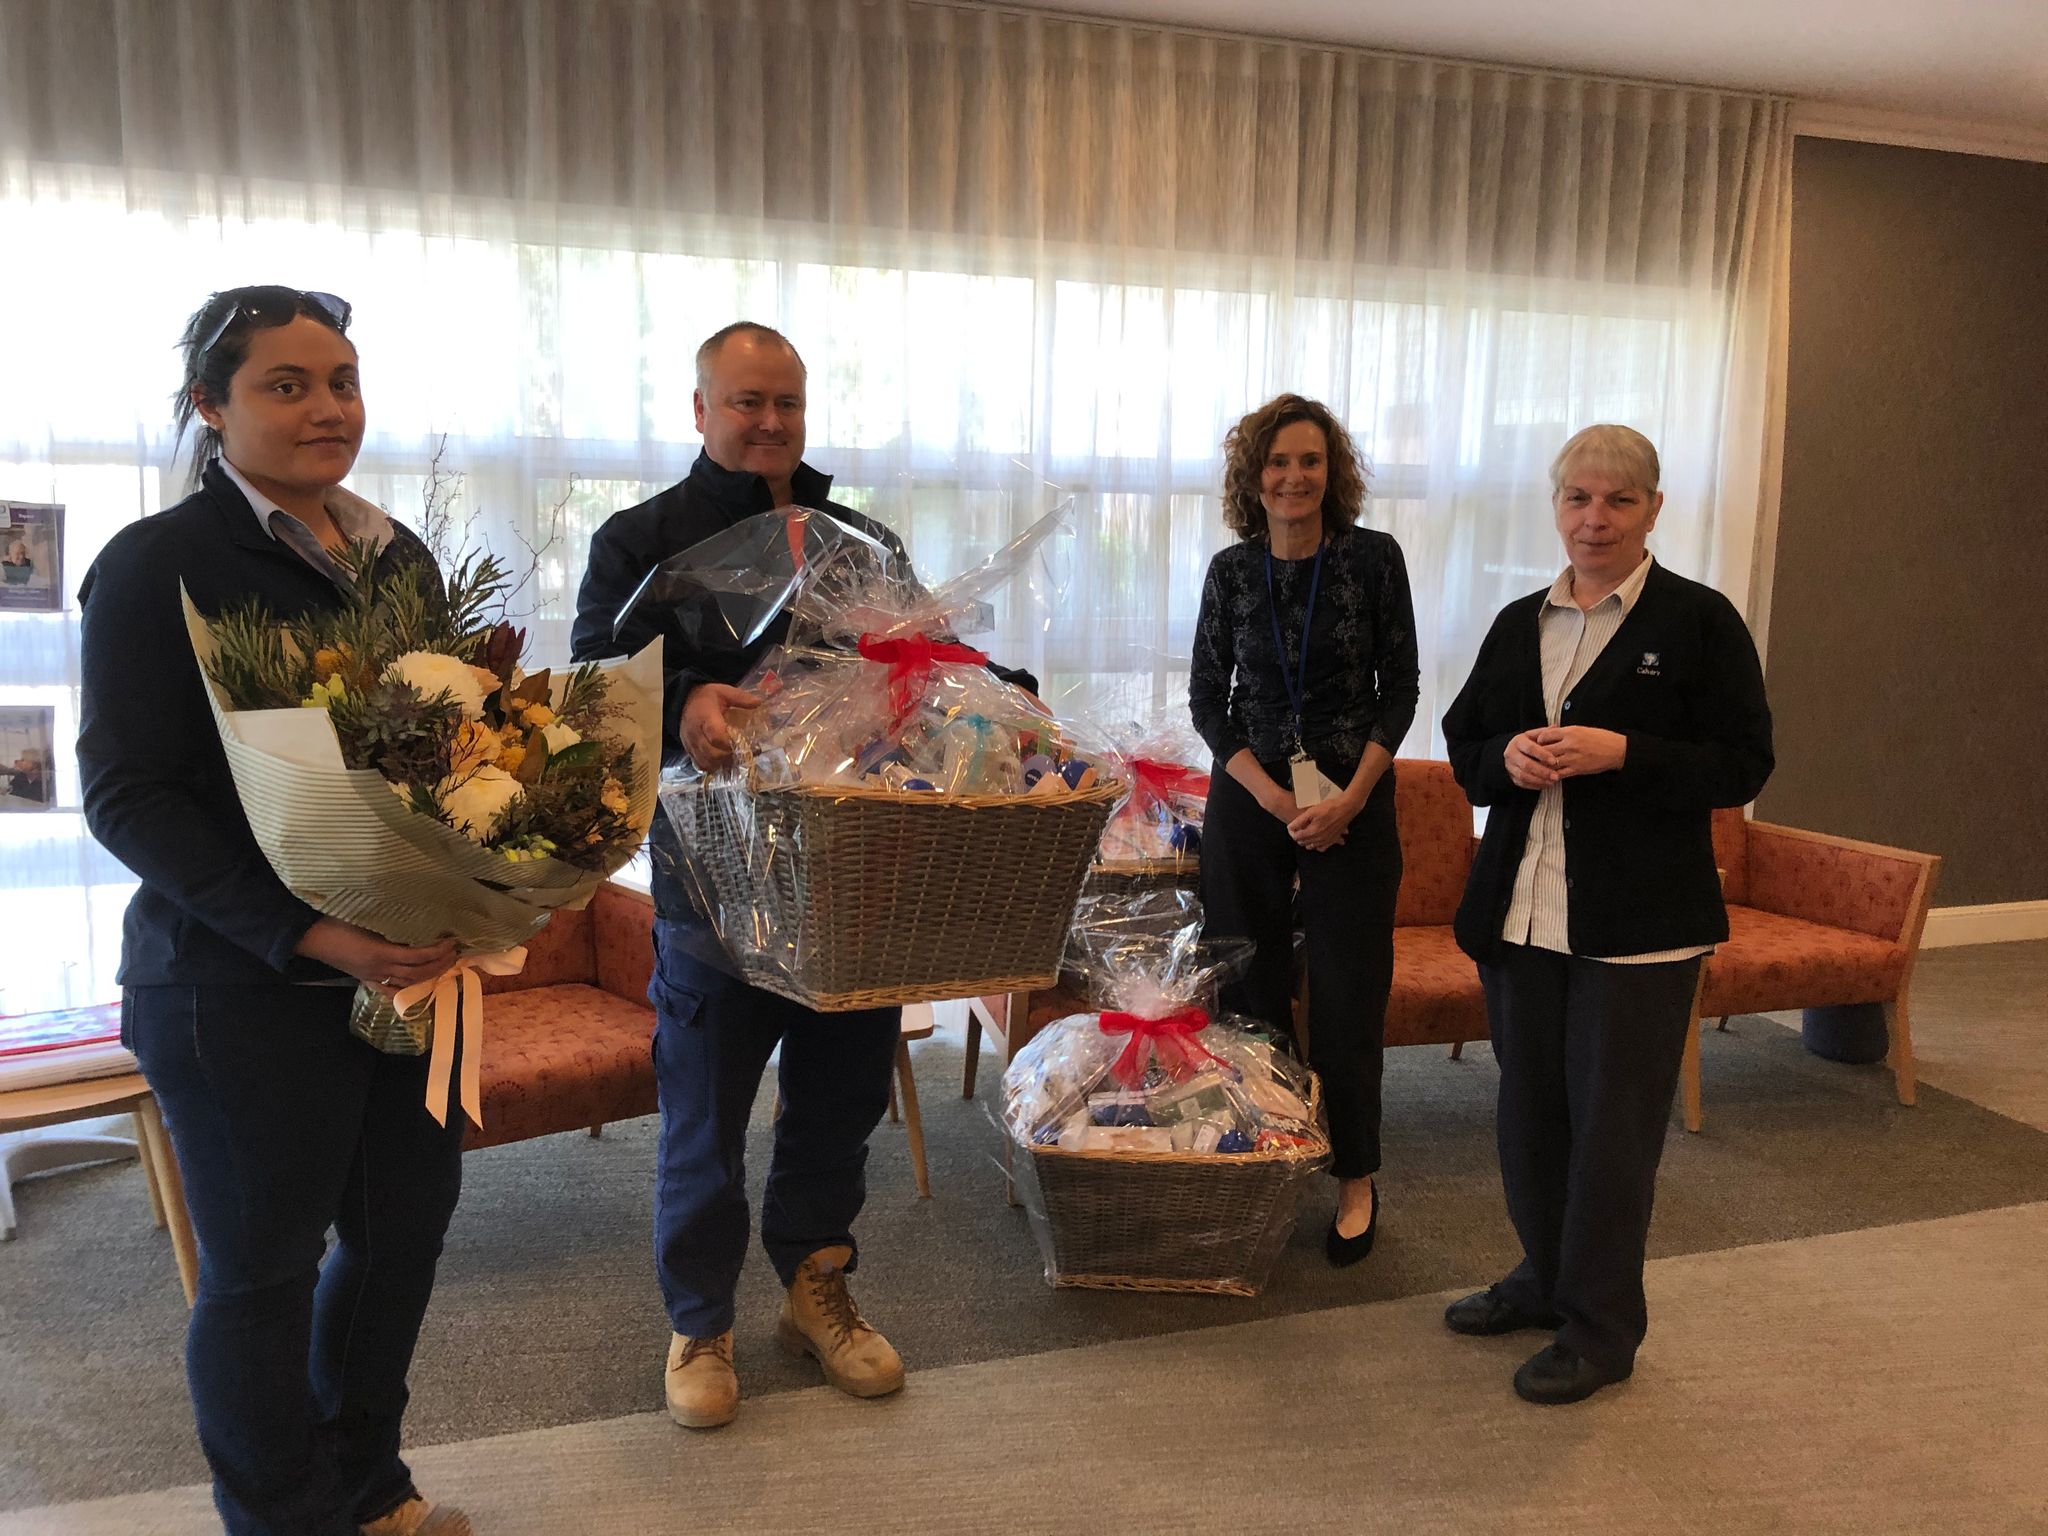 Calvary Muswellbrook Retirement Community residents were delighted to receive gift hampers donated by Malabar Coal